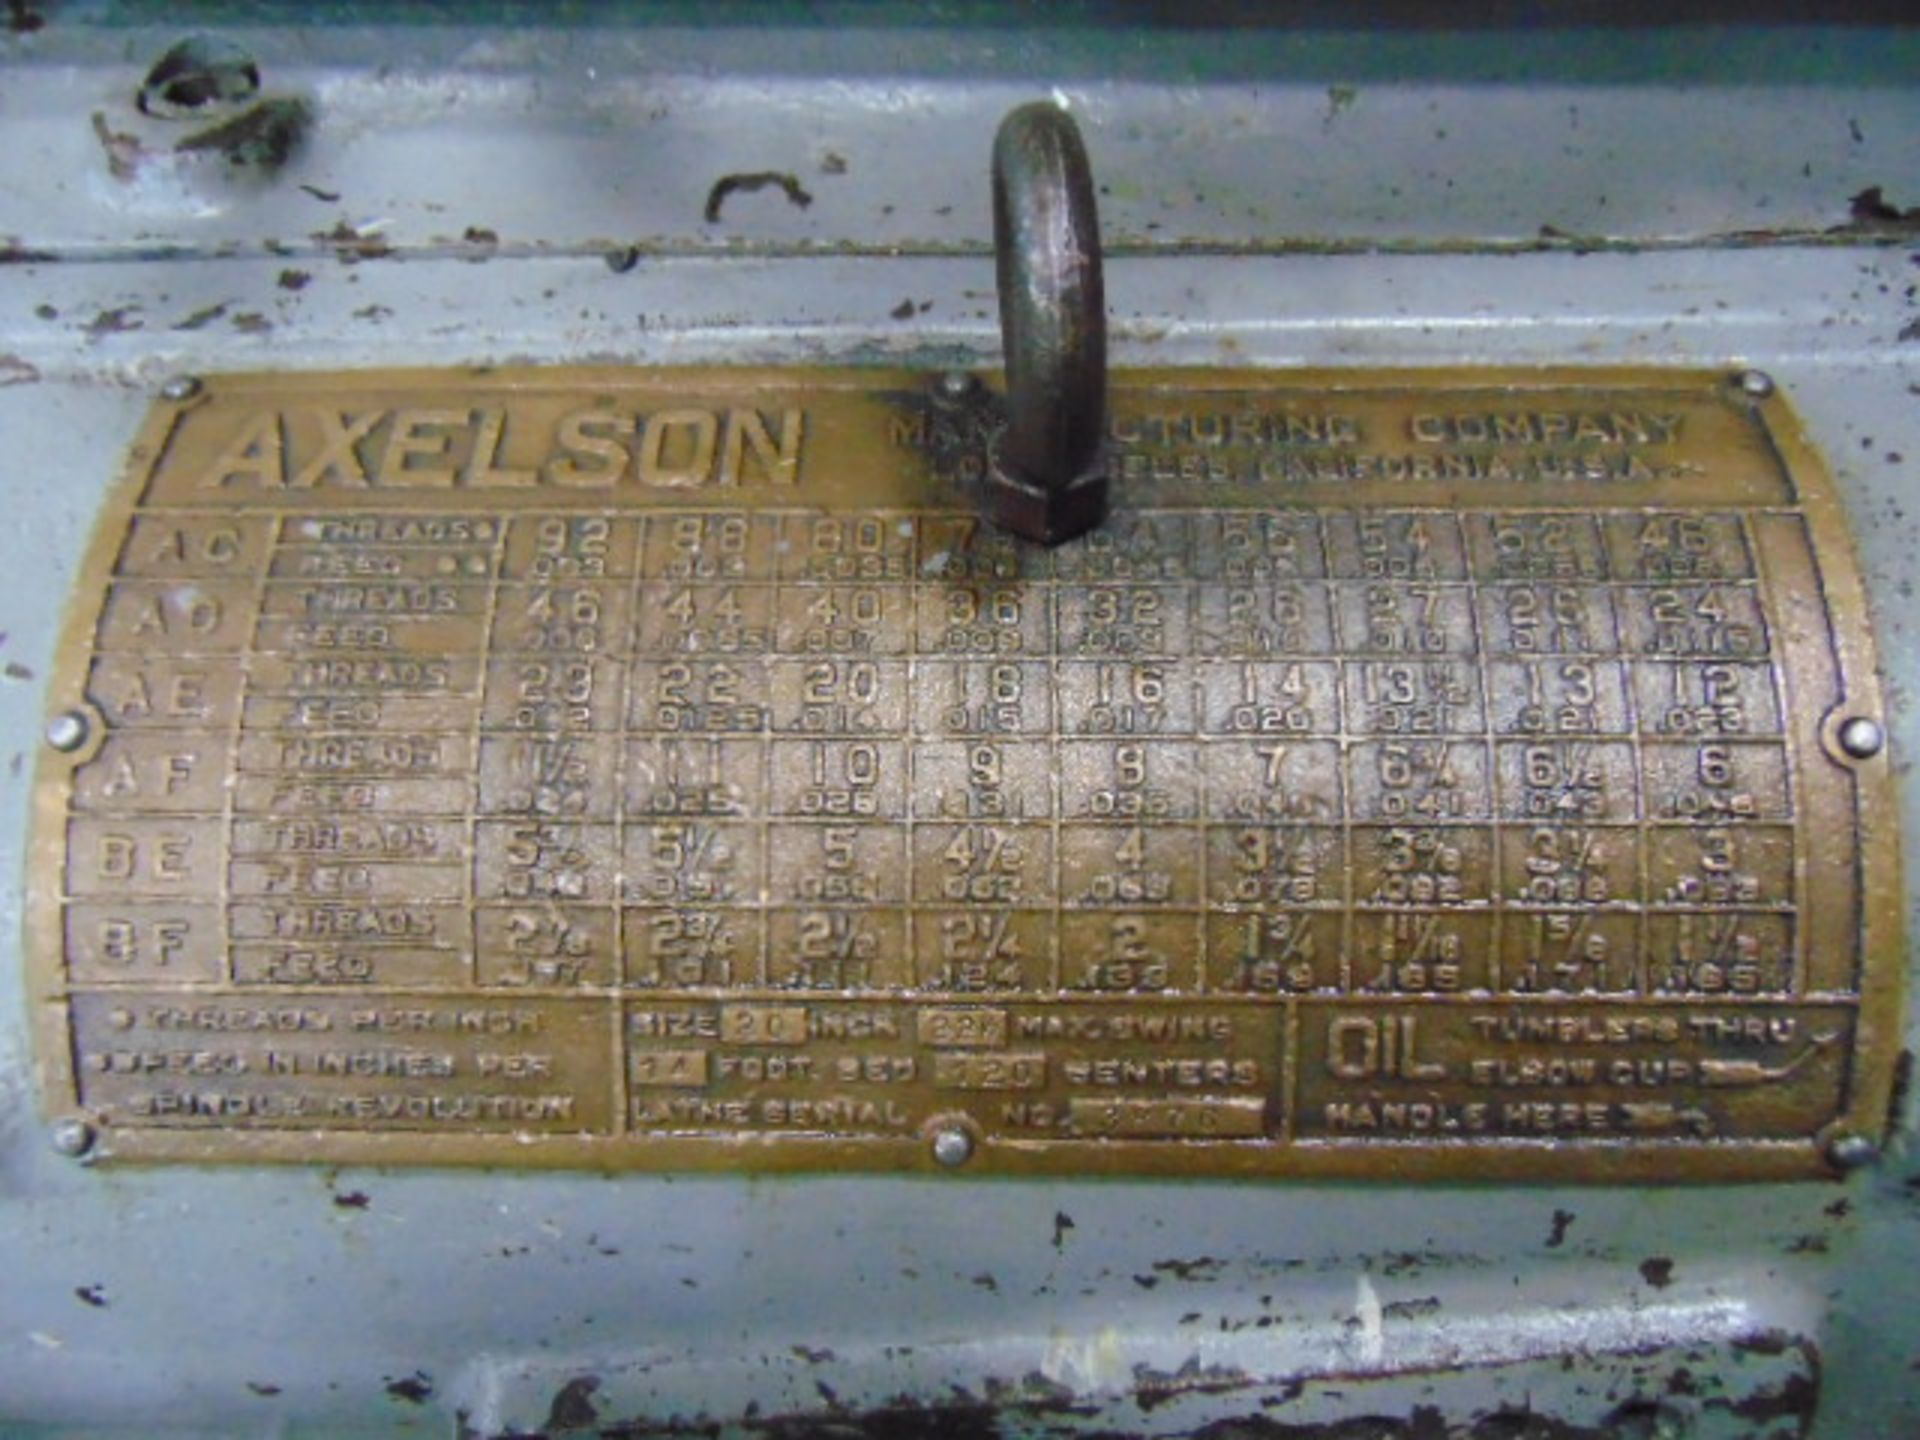 ENGINE LATHE, AXELSON 20” X 120”, 22-1/2” swing, spdl. spds: 9.5-961 RPM, 2-1/4” spdl. hole, taper - Image 5 of 12